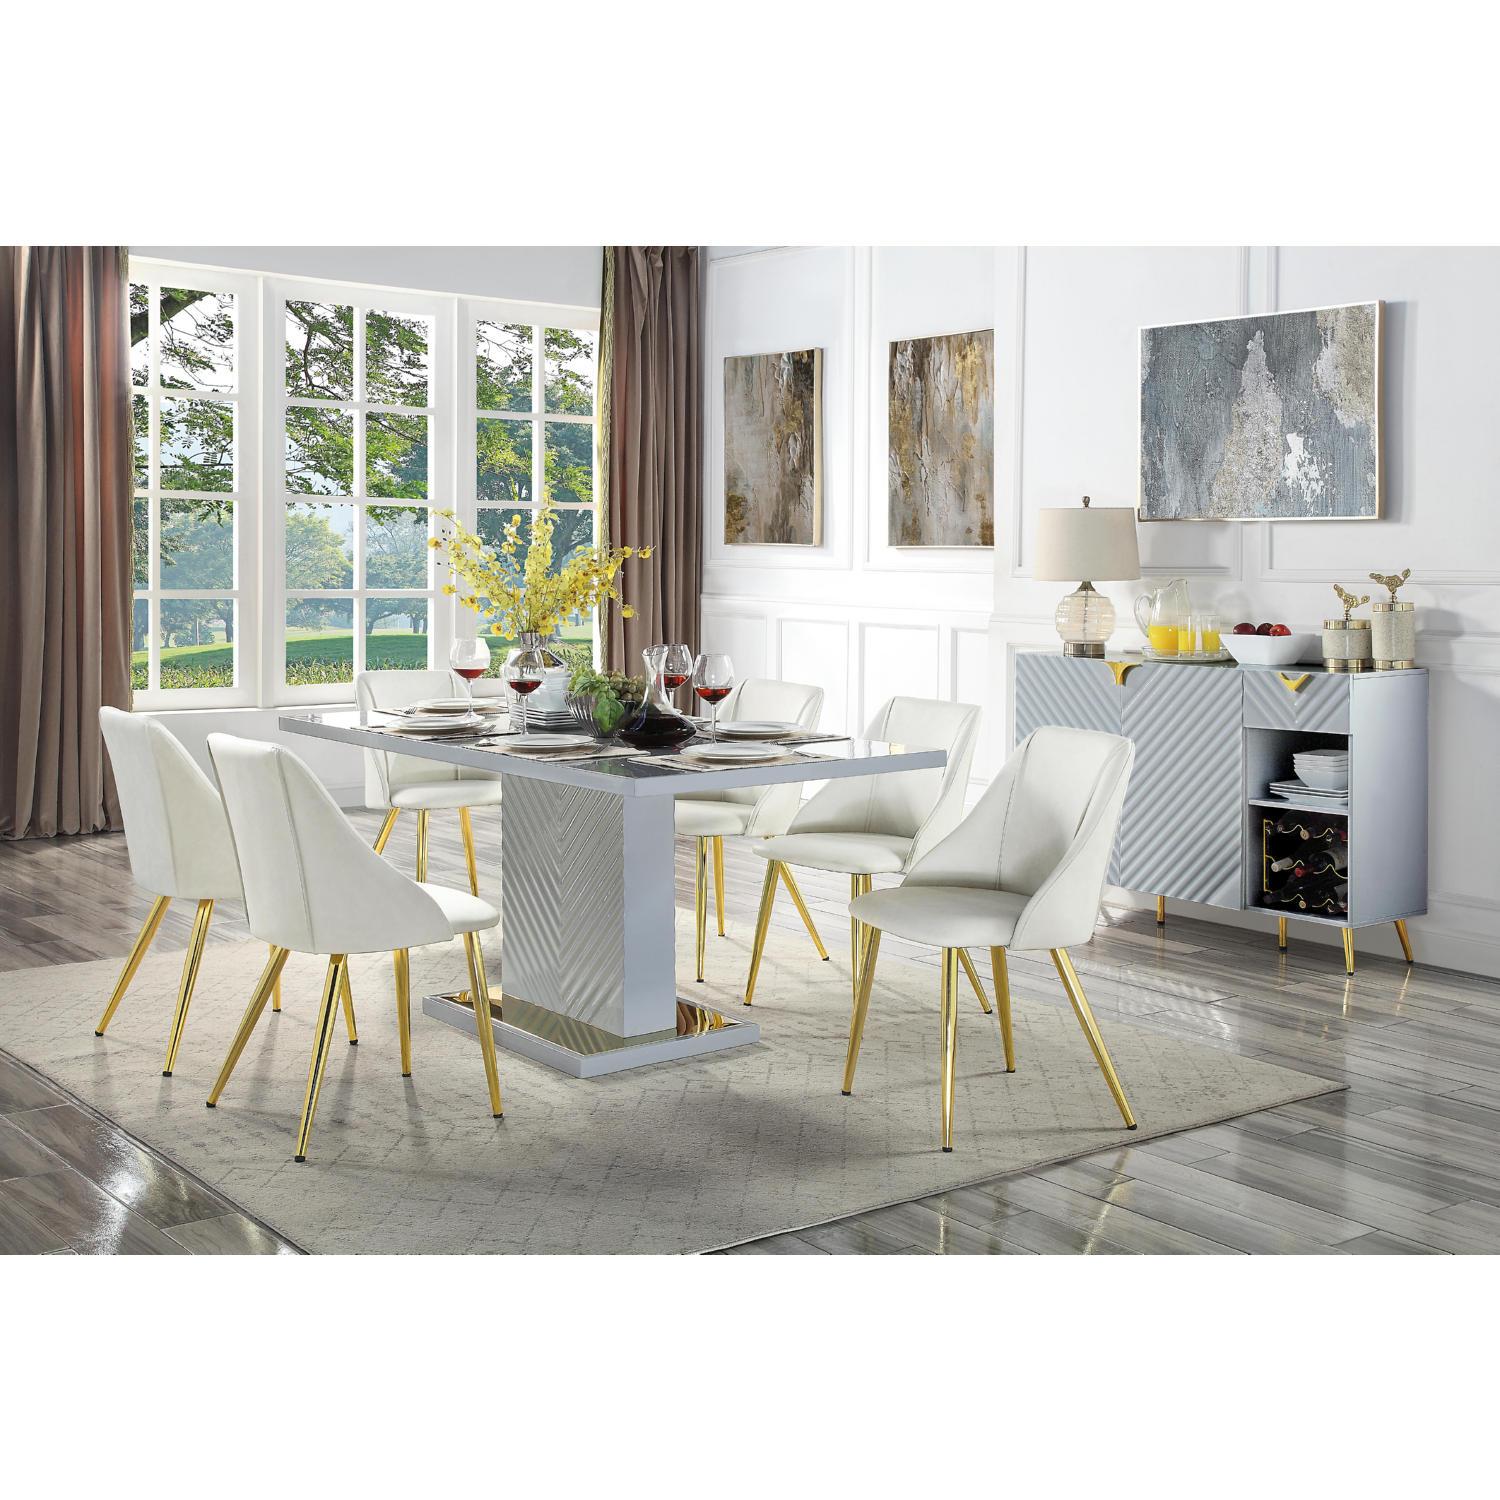 Modern, Casual Dining Room Set Gaines DN01261-7pcs in Gray 